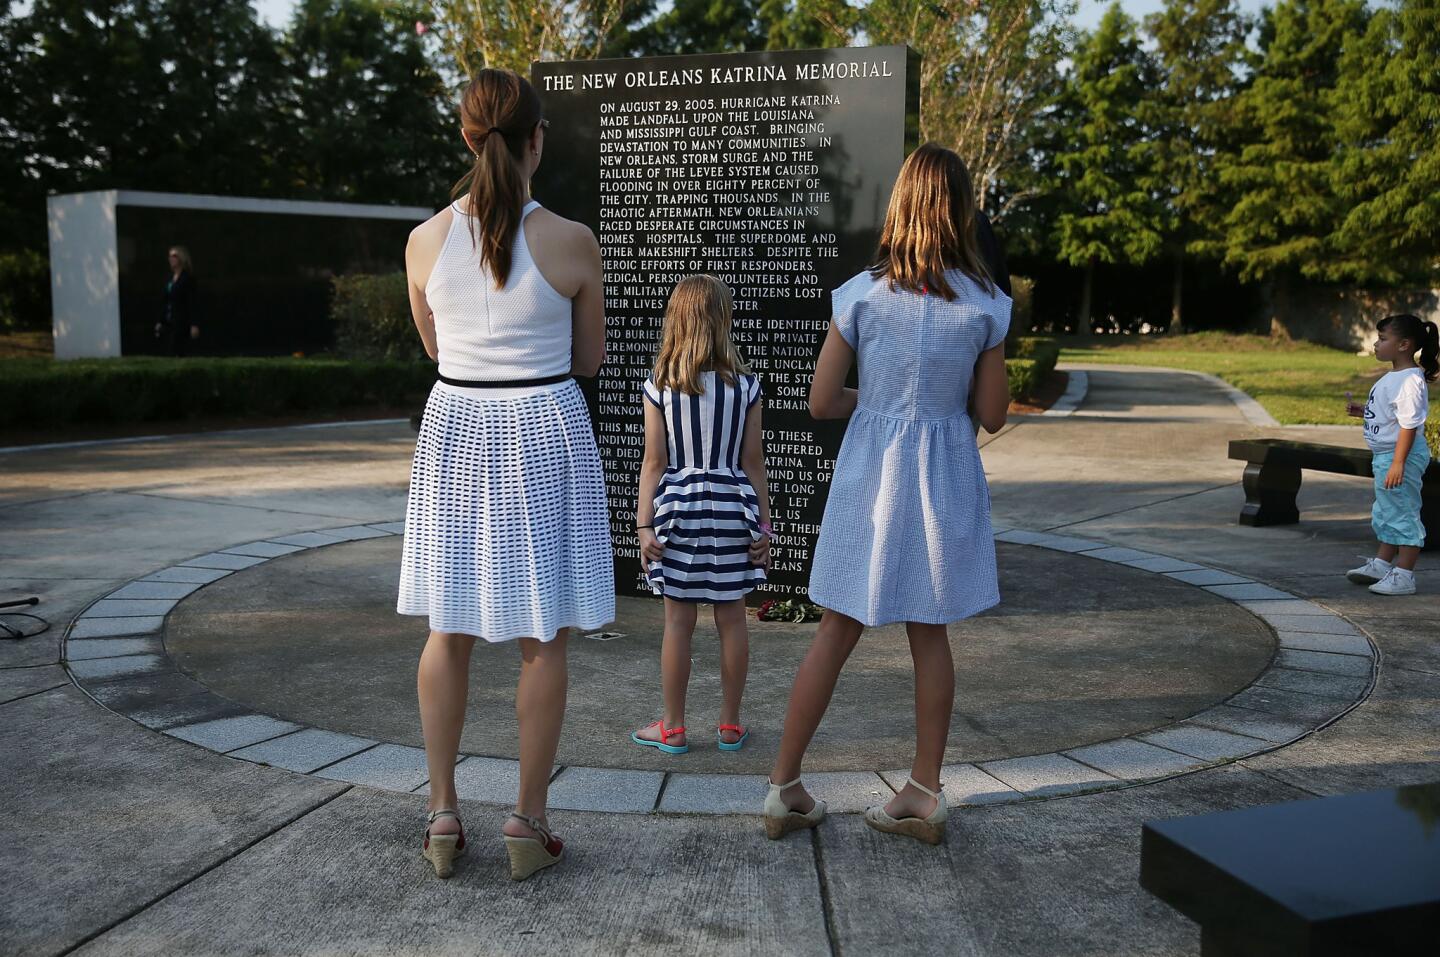 People pay their respects at the New Orleans Katrina Memorial, where nearly 100 unclaimed or unidentified victims of Hurricane Katrina are interred, as they attend an event to remember the 10th anniversary of Hurricane Katrina on August 29, 2015 in New Orleans, Louisiana. Hurricane Katrina killed 1836 people and is considered the costliest natural disaster in U.S. history.